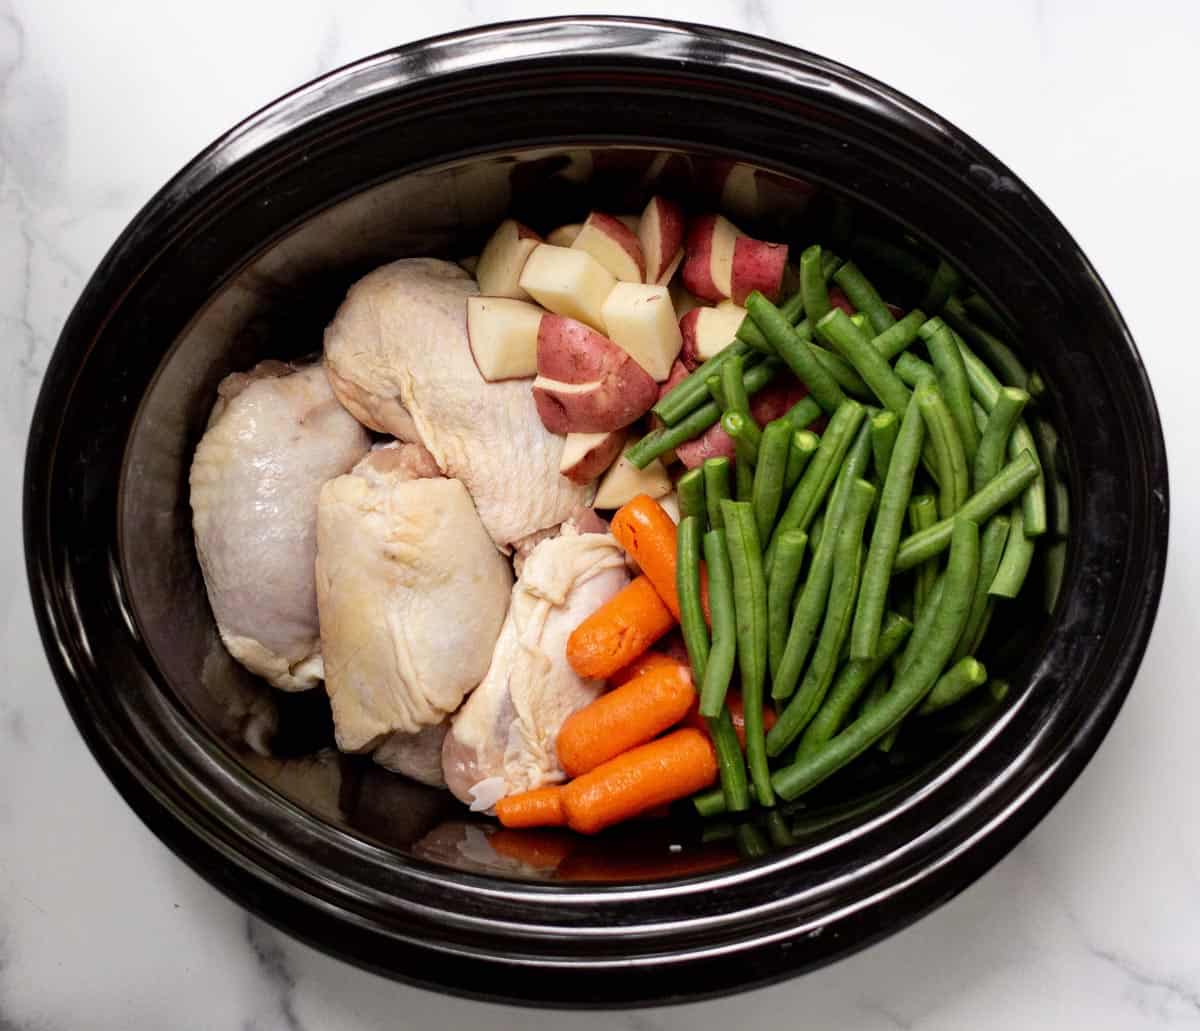 Raw chicken thighs, green beans, baby carrots, and cubed red potatoes in a slow cooker.